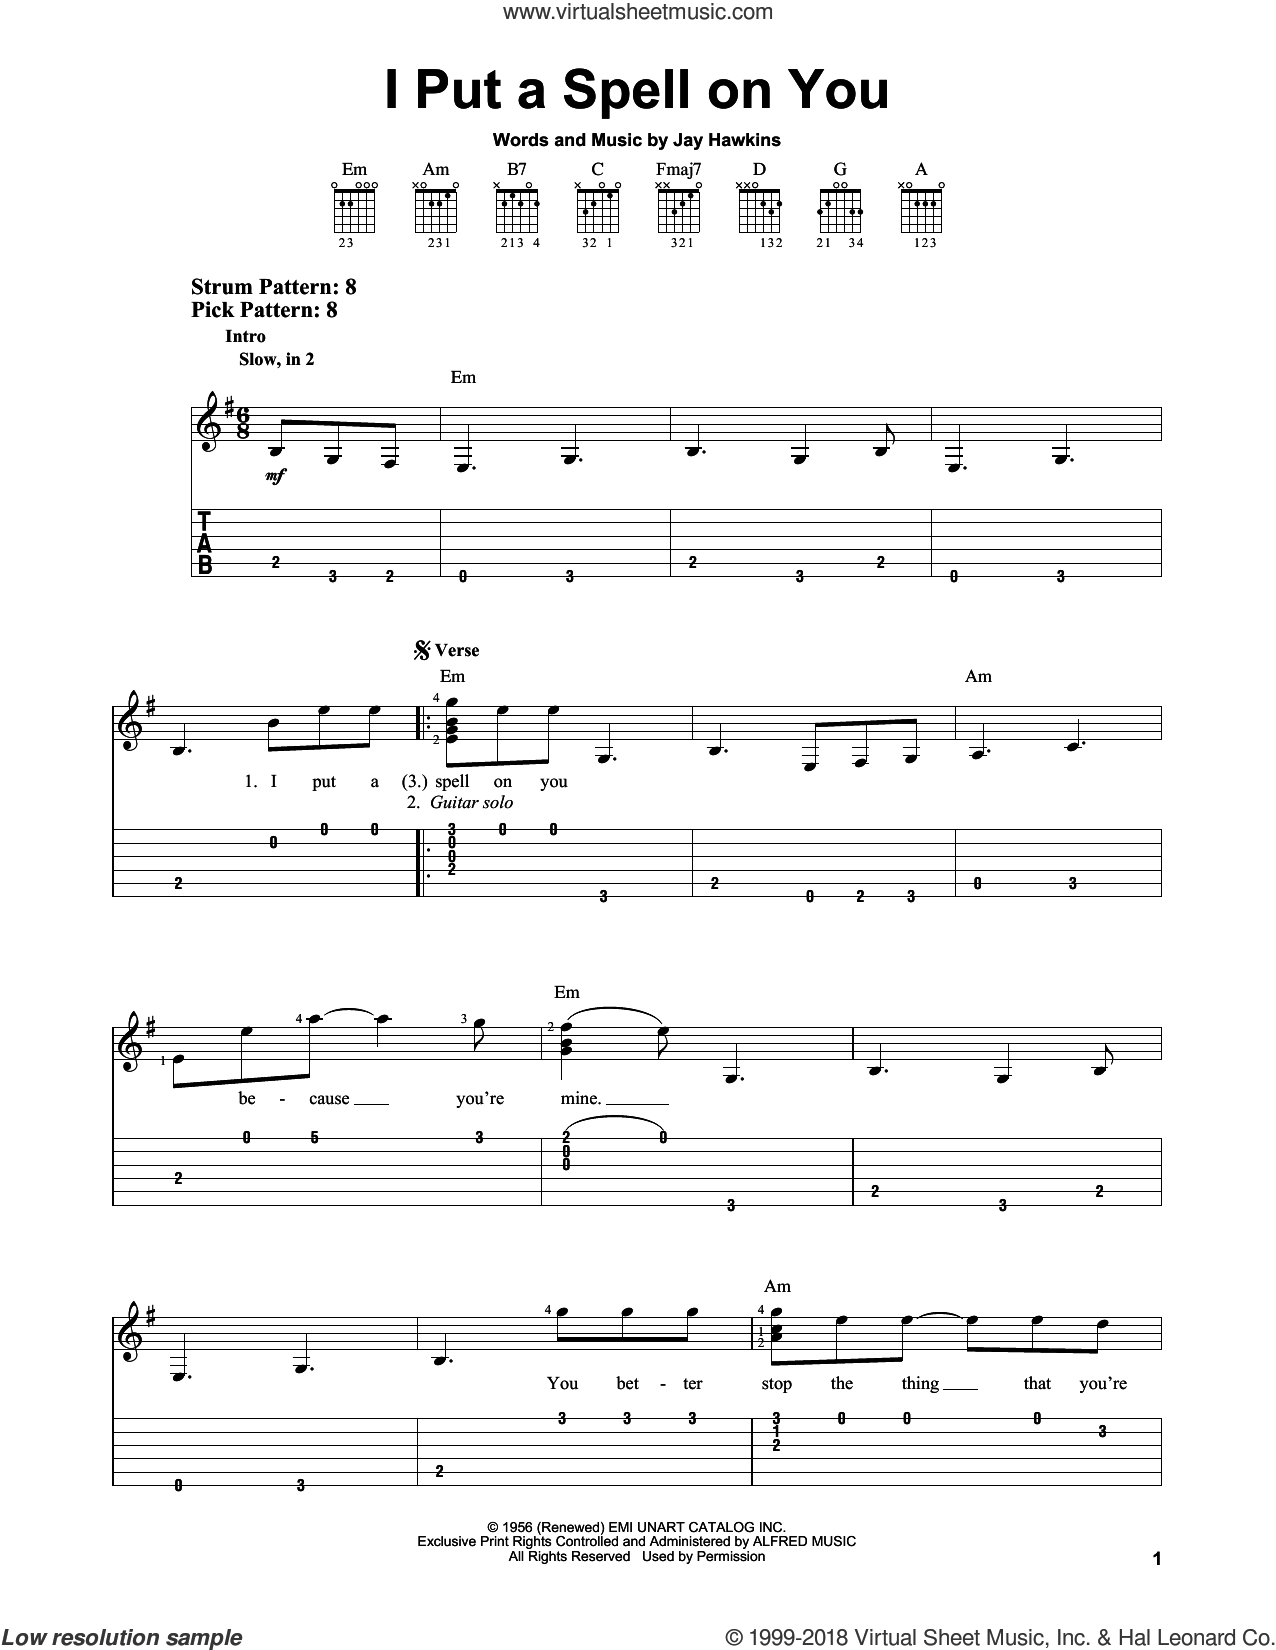 I Put A Spell On You sheet music for voice and piano (PDF)